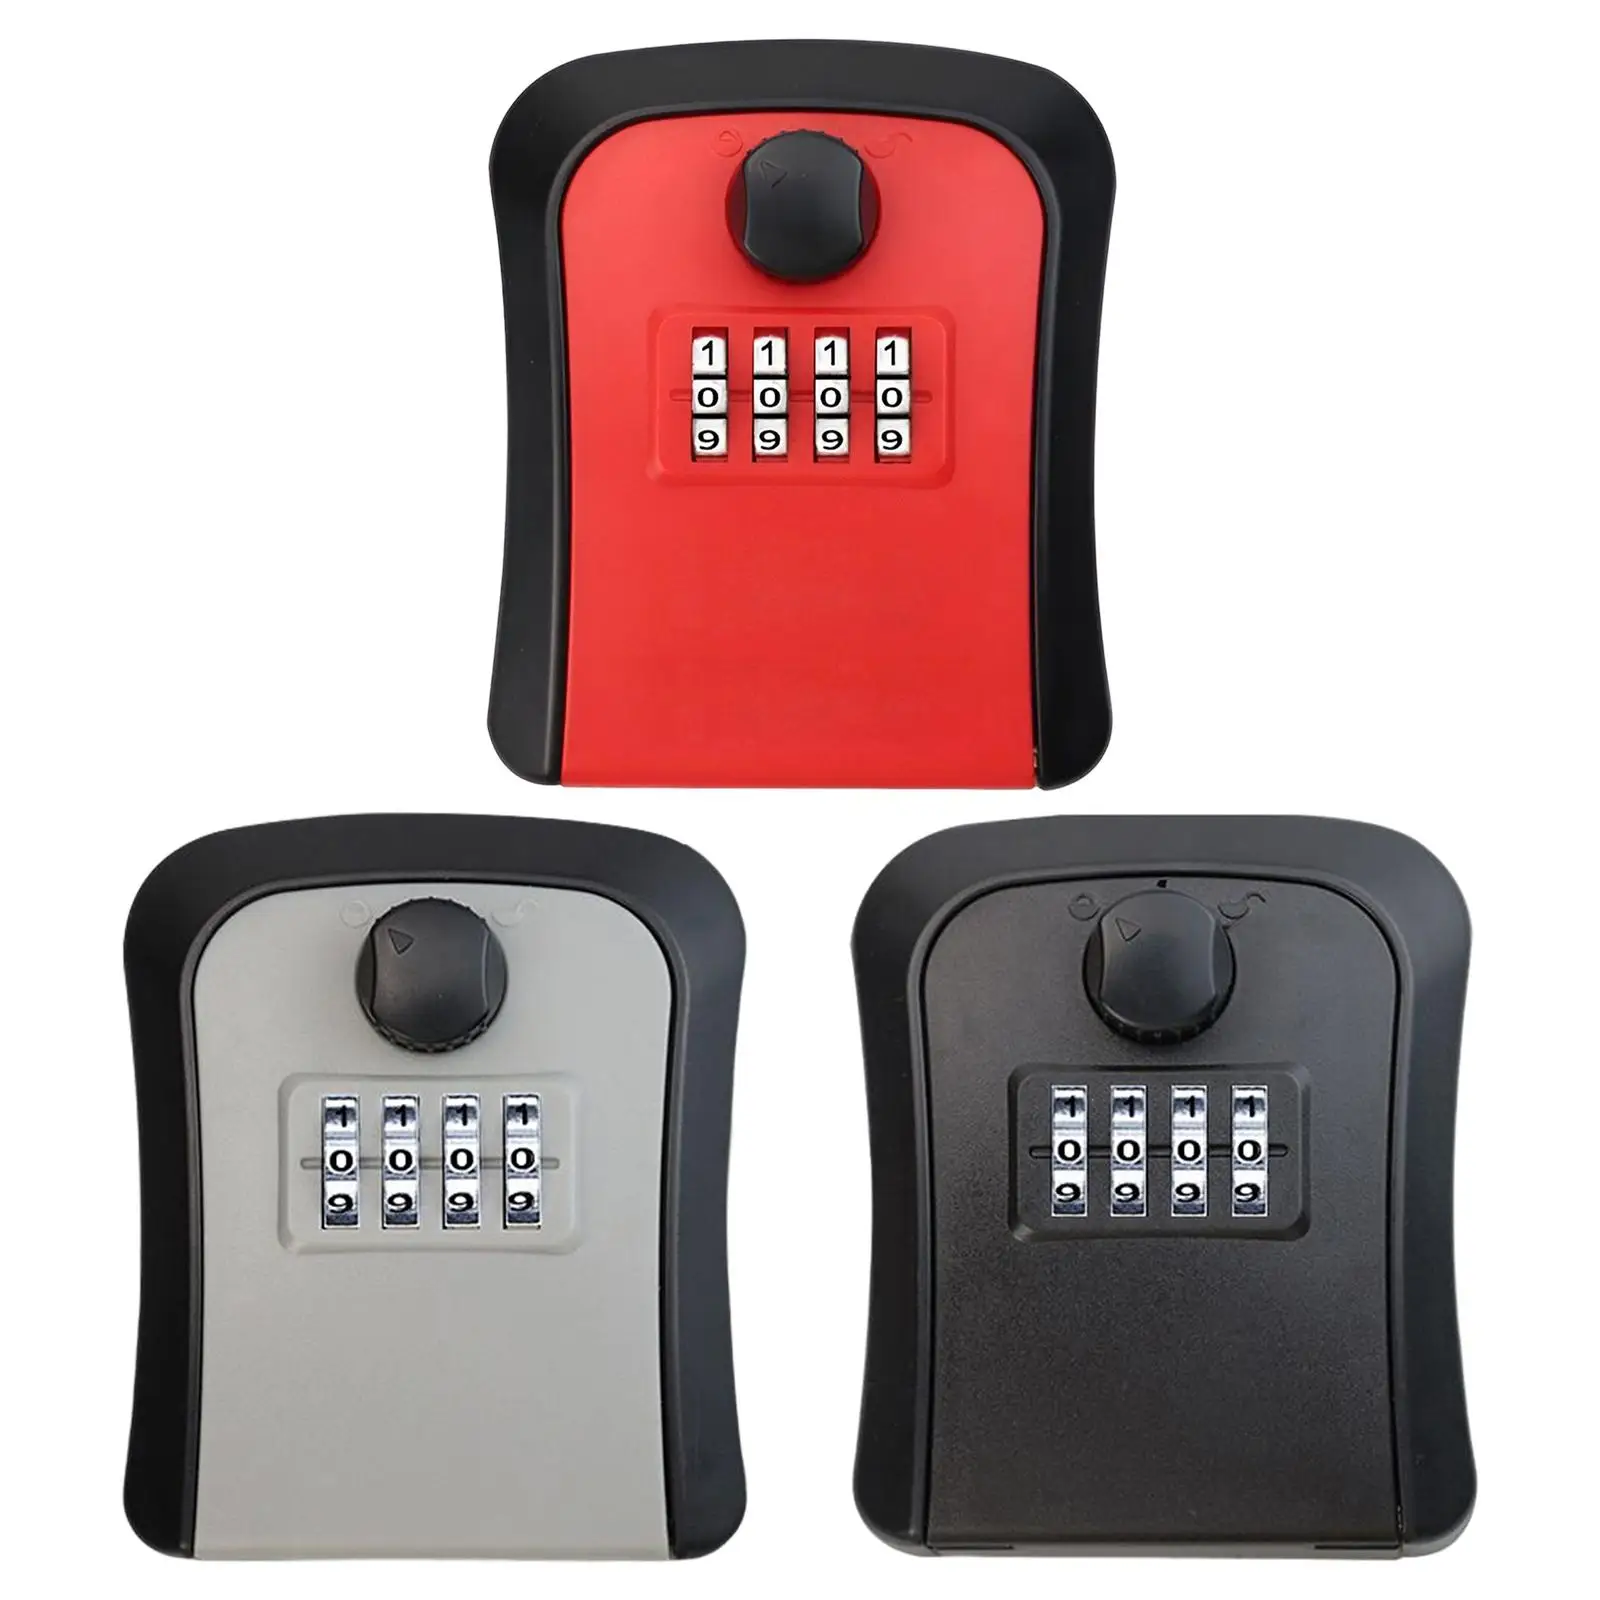 Portable Key Storage Lock Wall Mounted 4 Digit Combination Lock Box for Home Garage Store Indoor Accessories